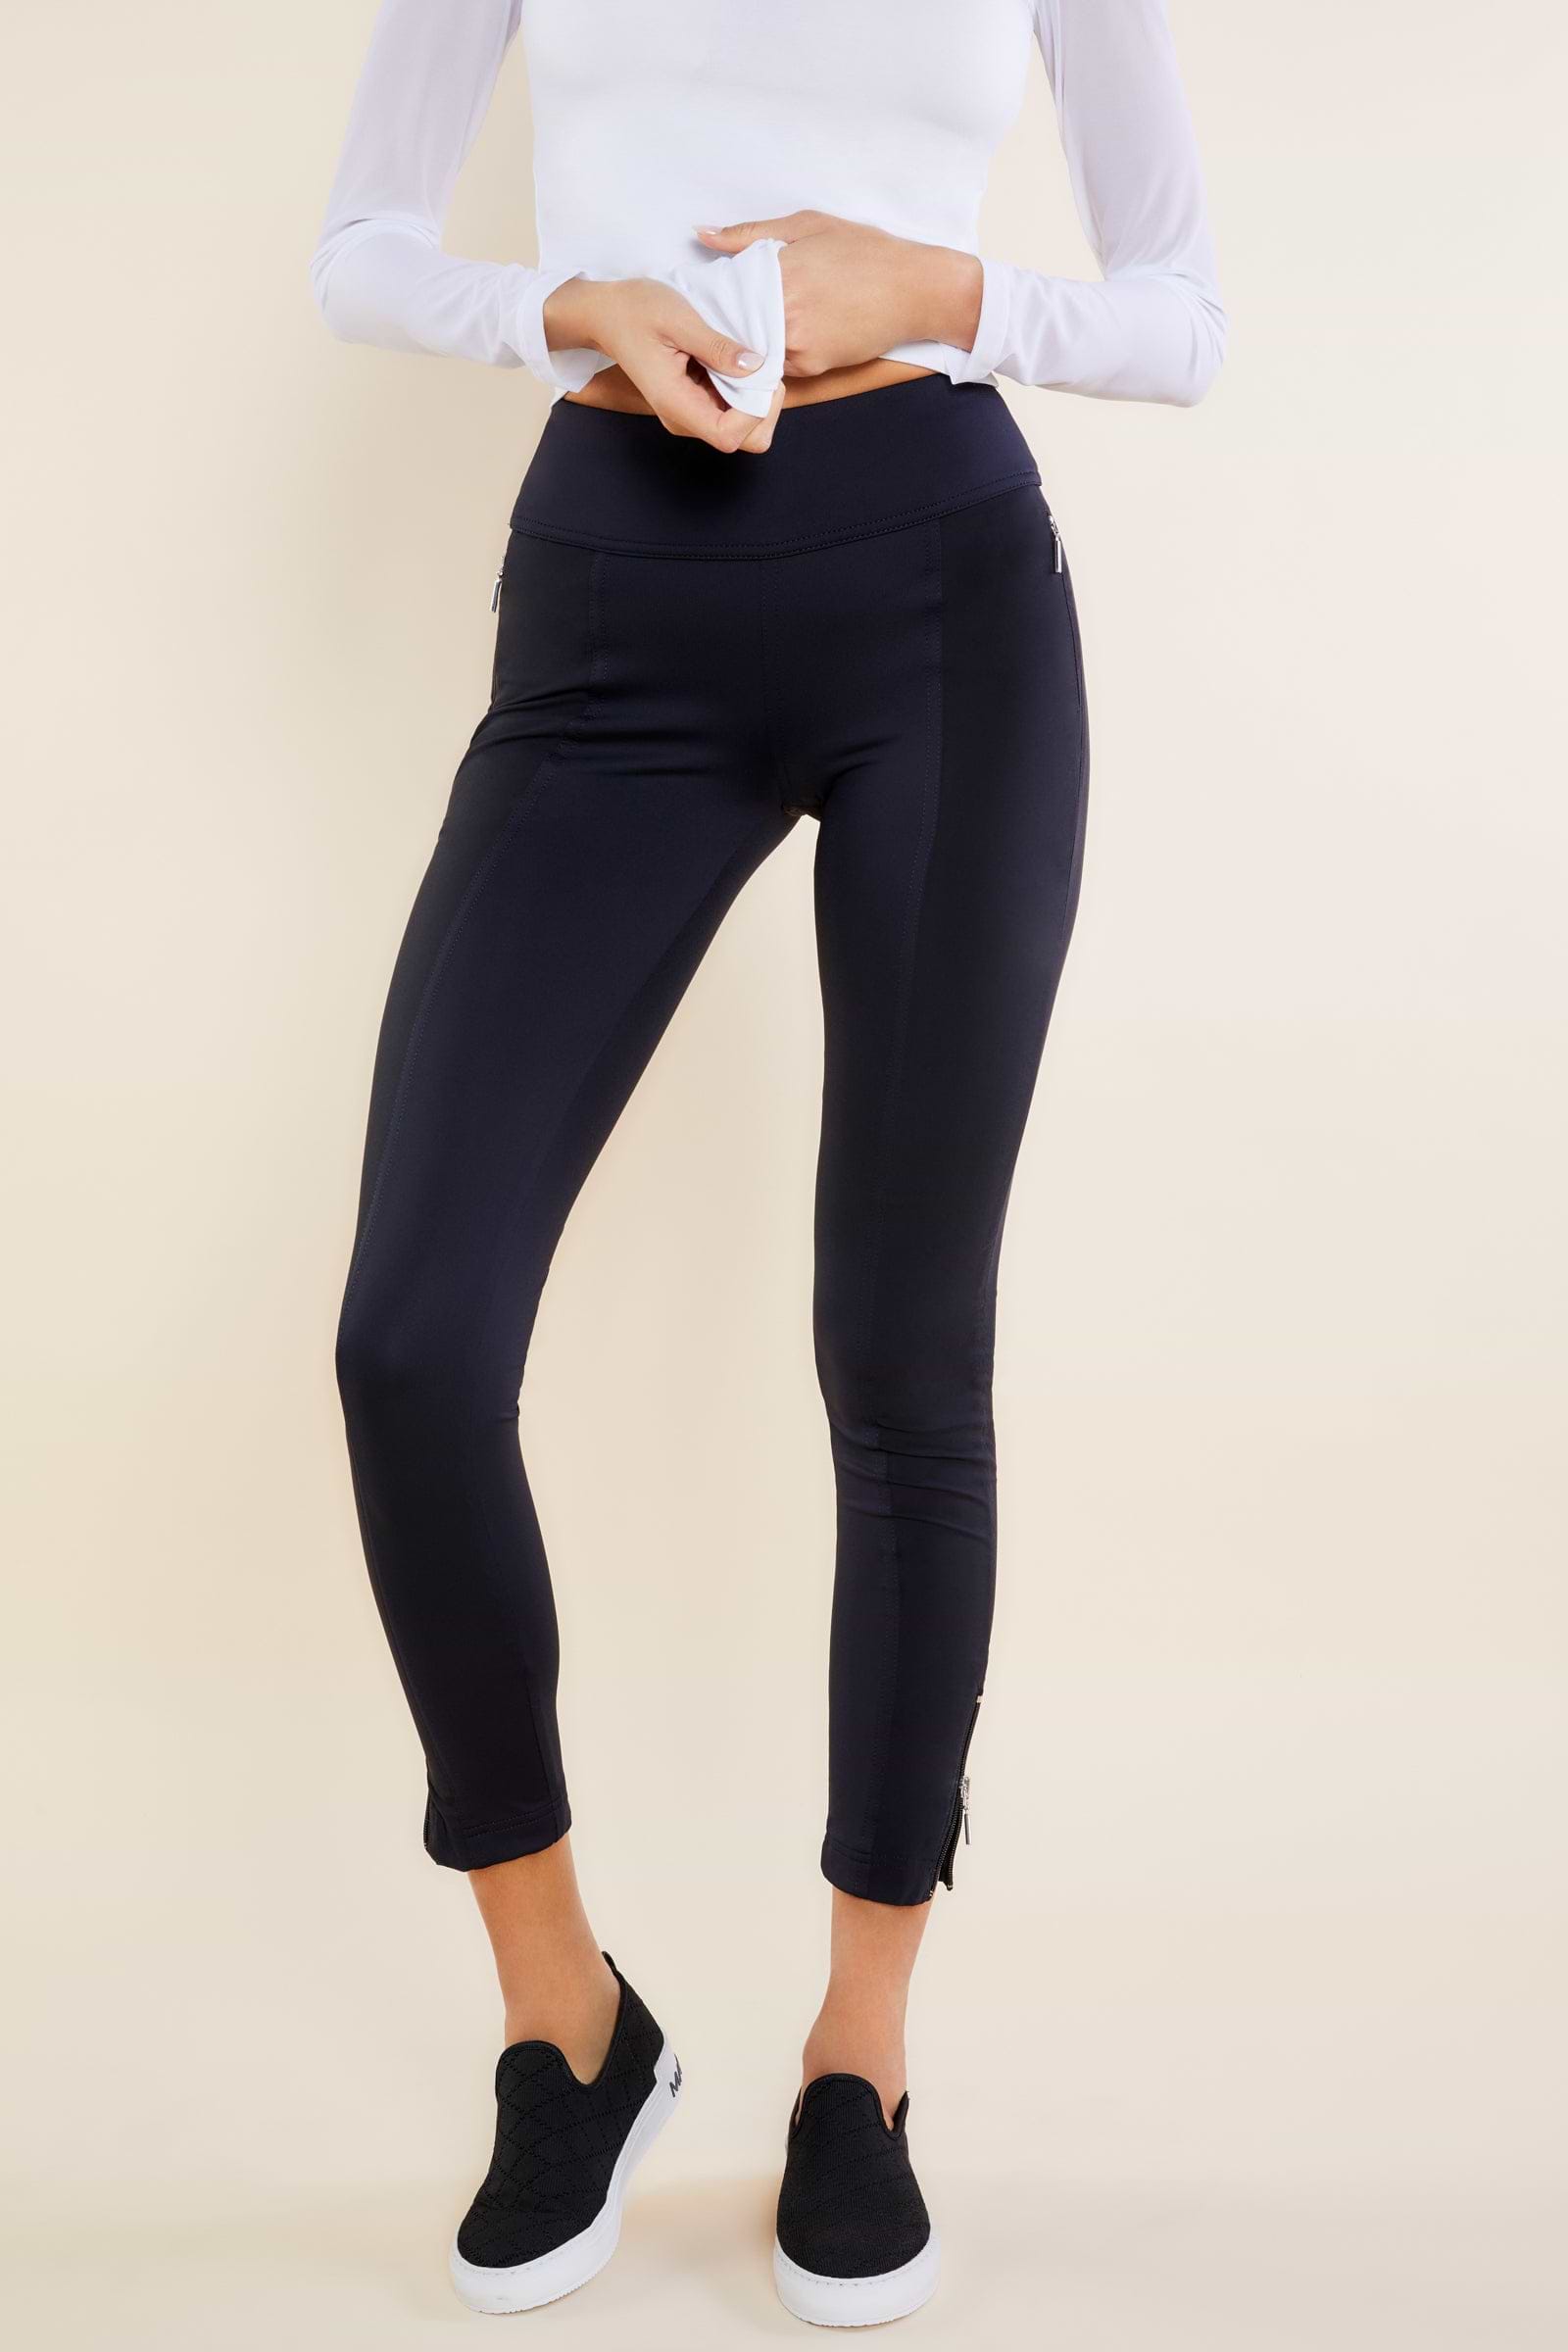 The Best Travel Pants. Front Profile of the Allie Pant in Black